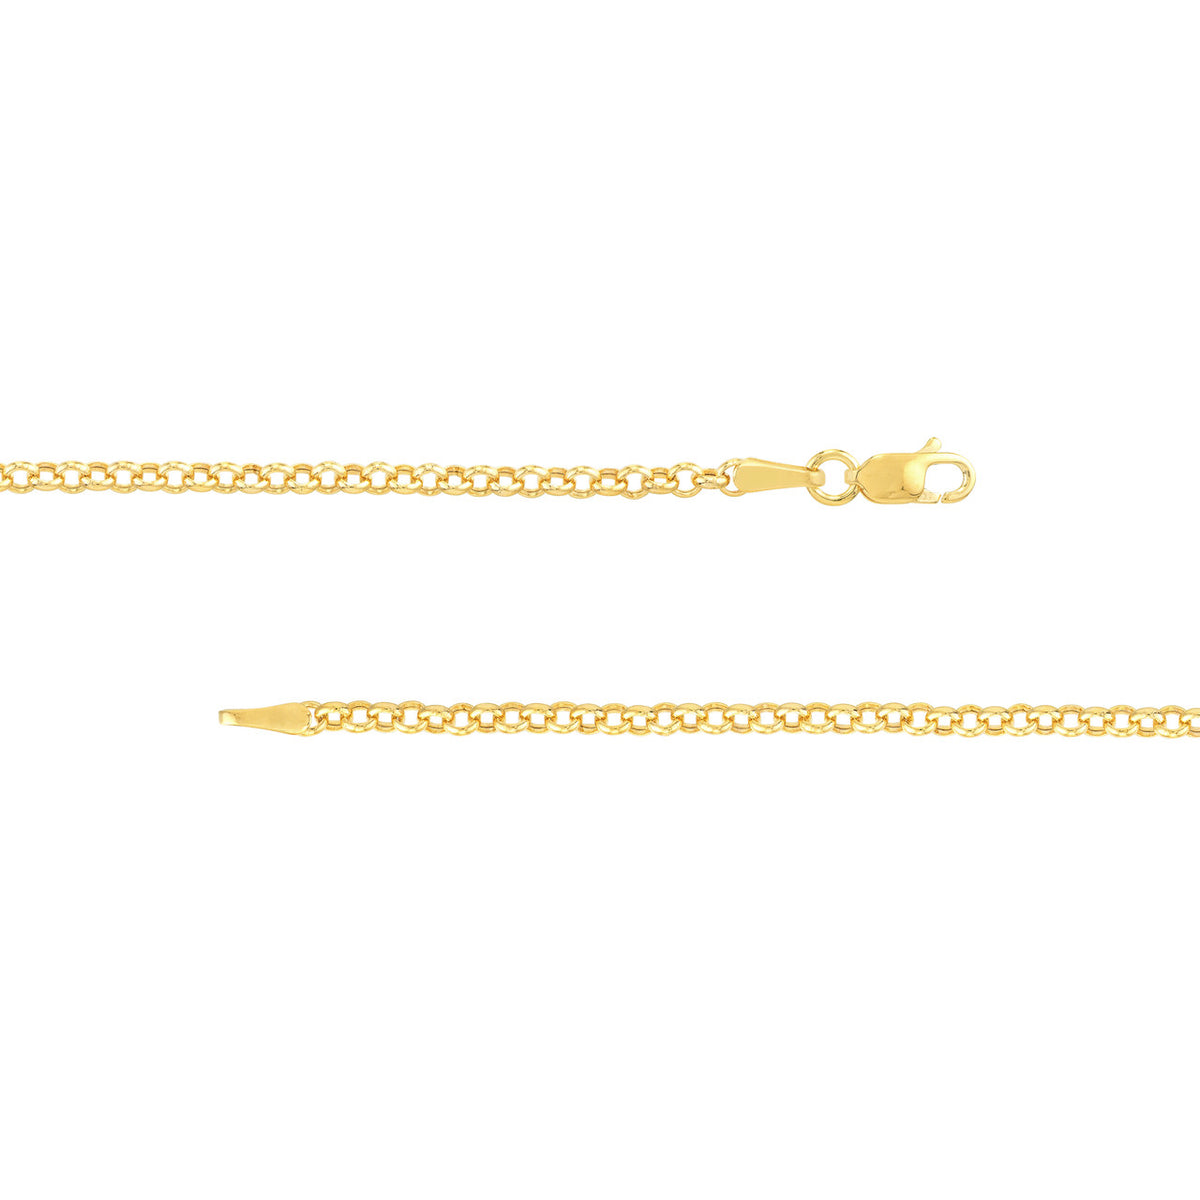 14K Yellow Gold or White Gold 2.5mm Rolo Chain Necklace with Lobster Lock